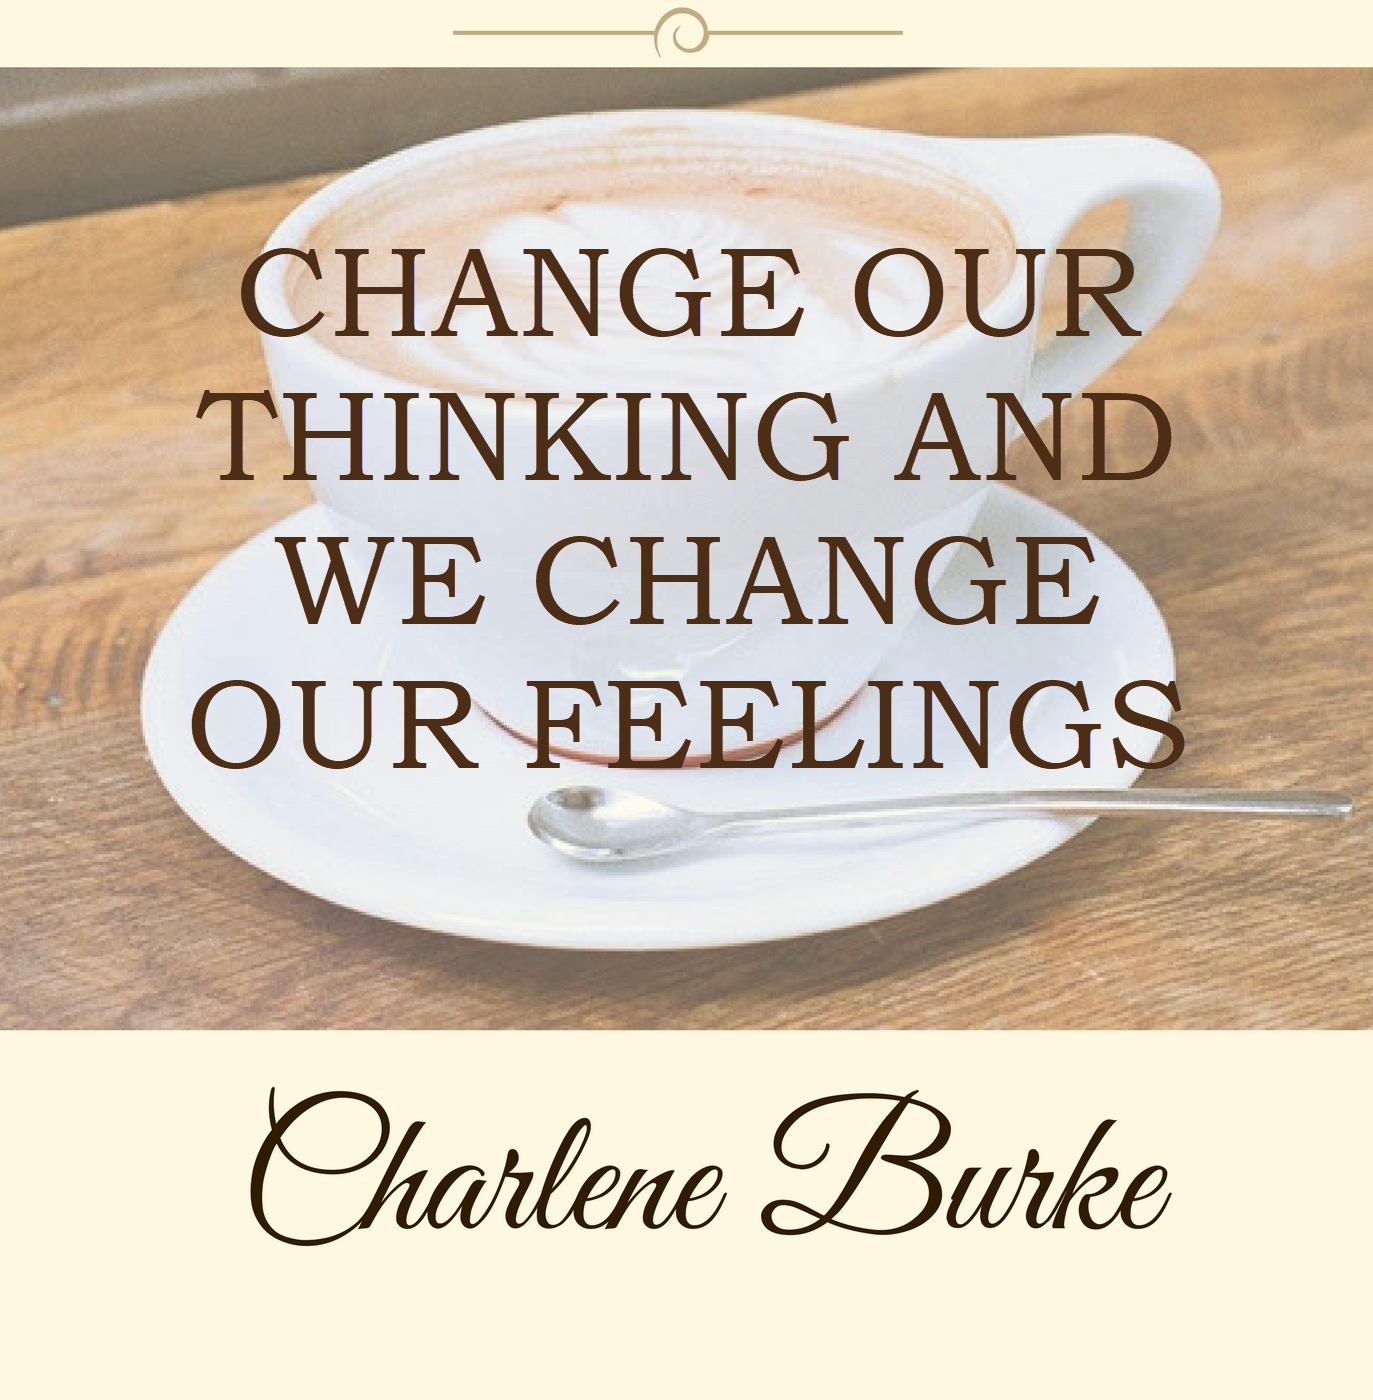 change our thinking and we change our feelings